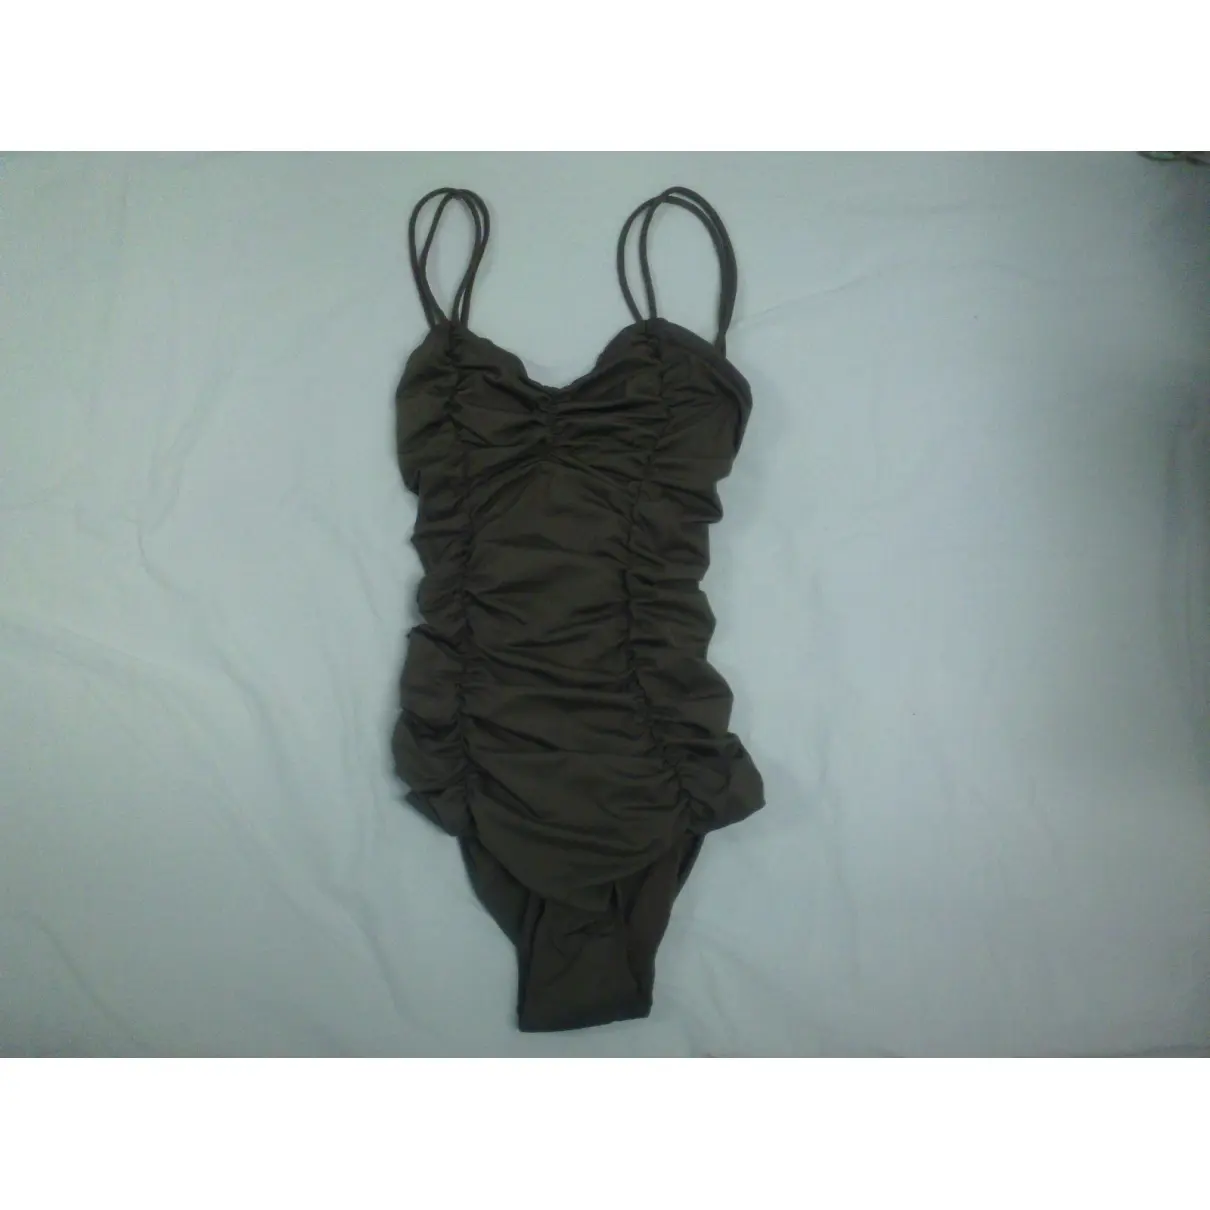 Michael Kors One-piece swimsuit for sale